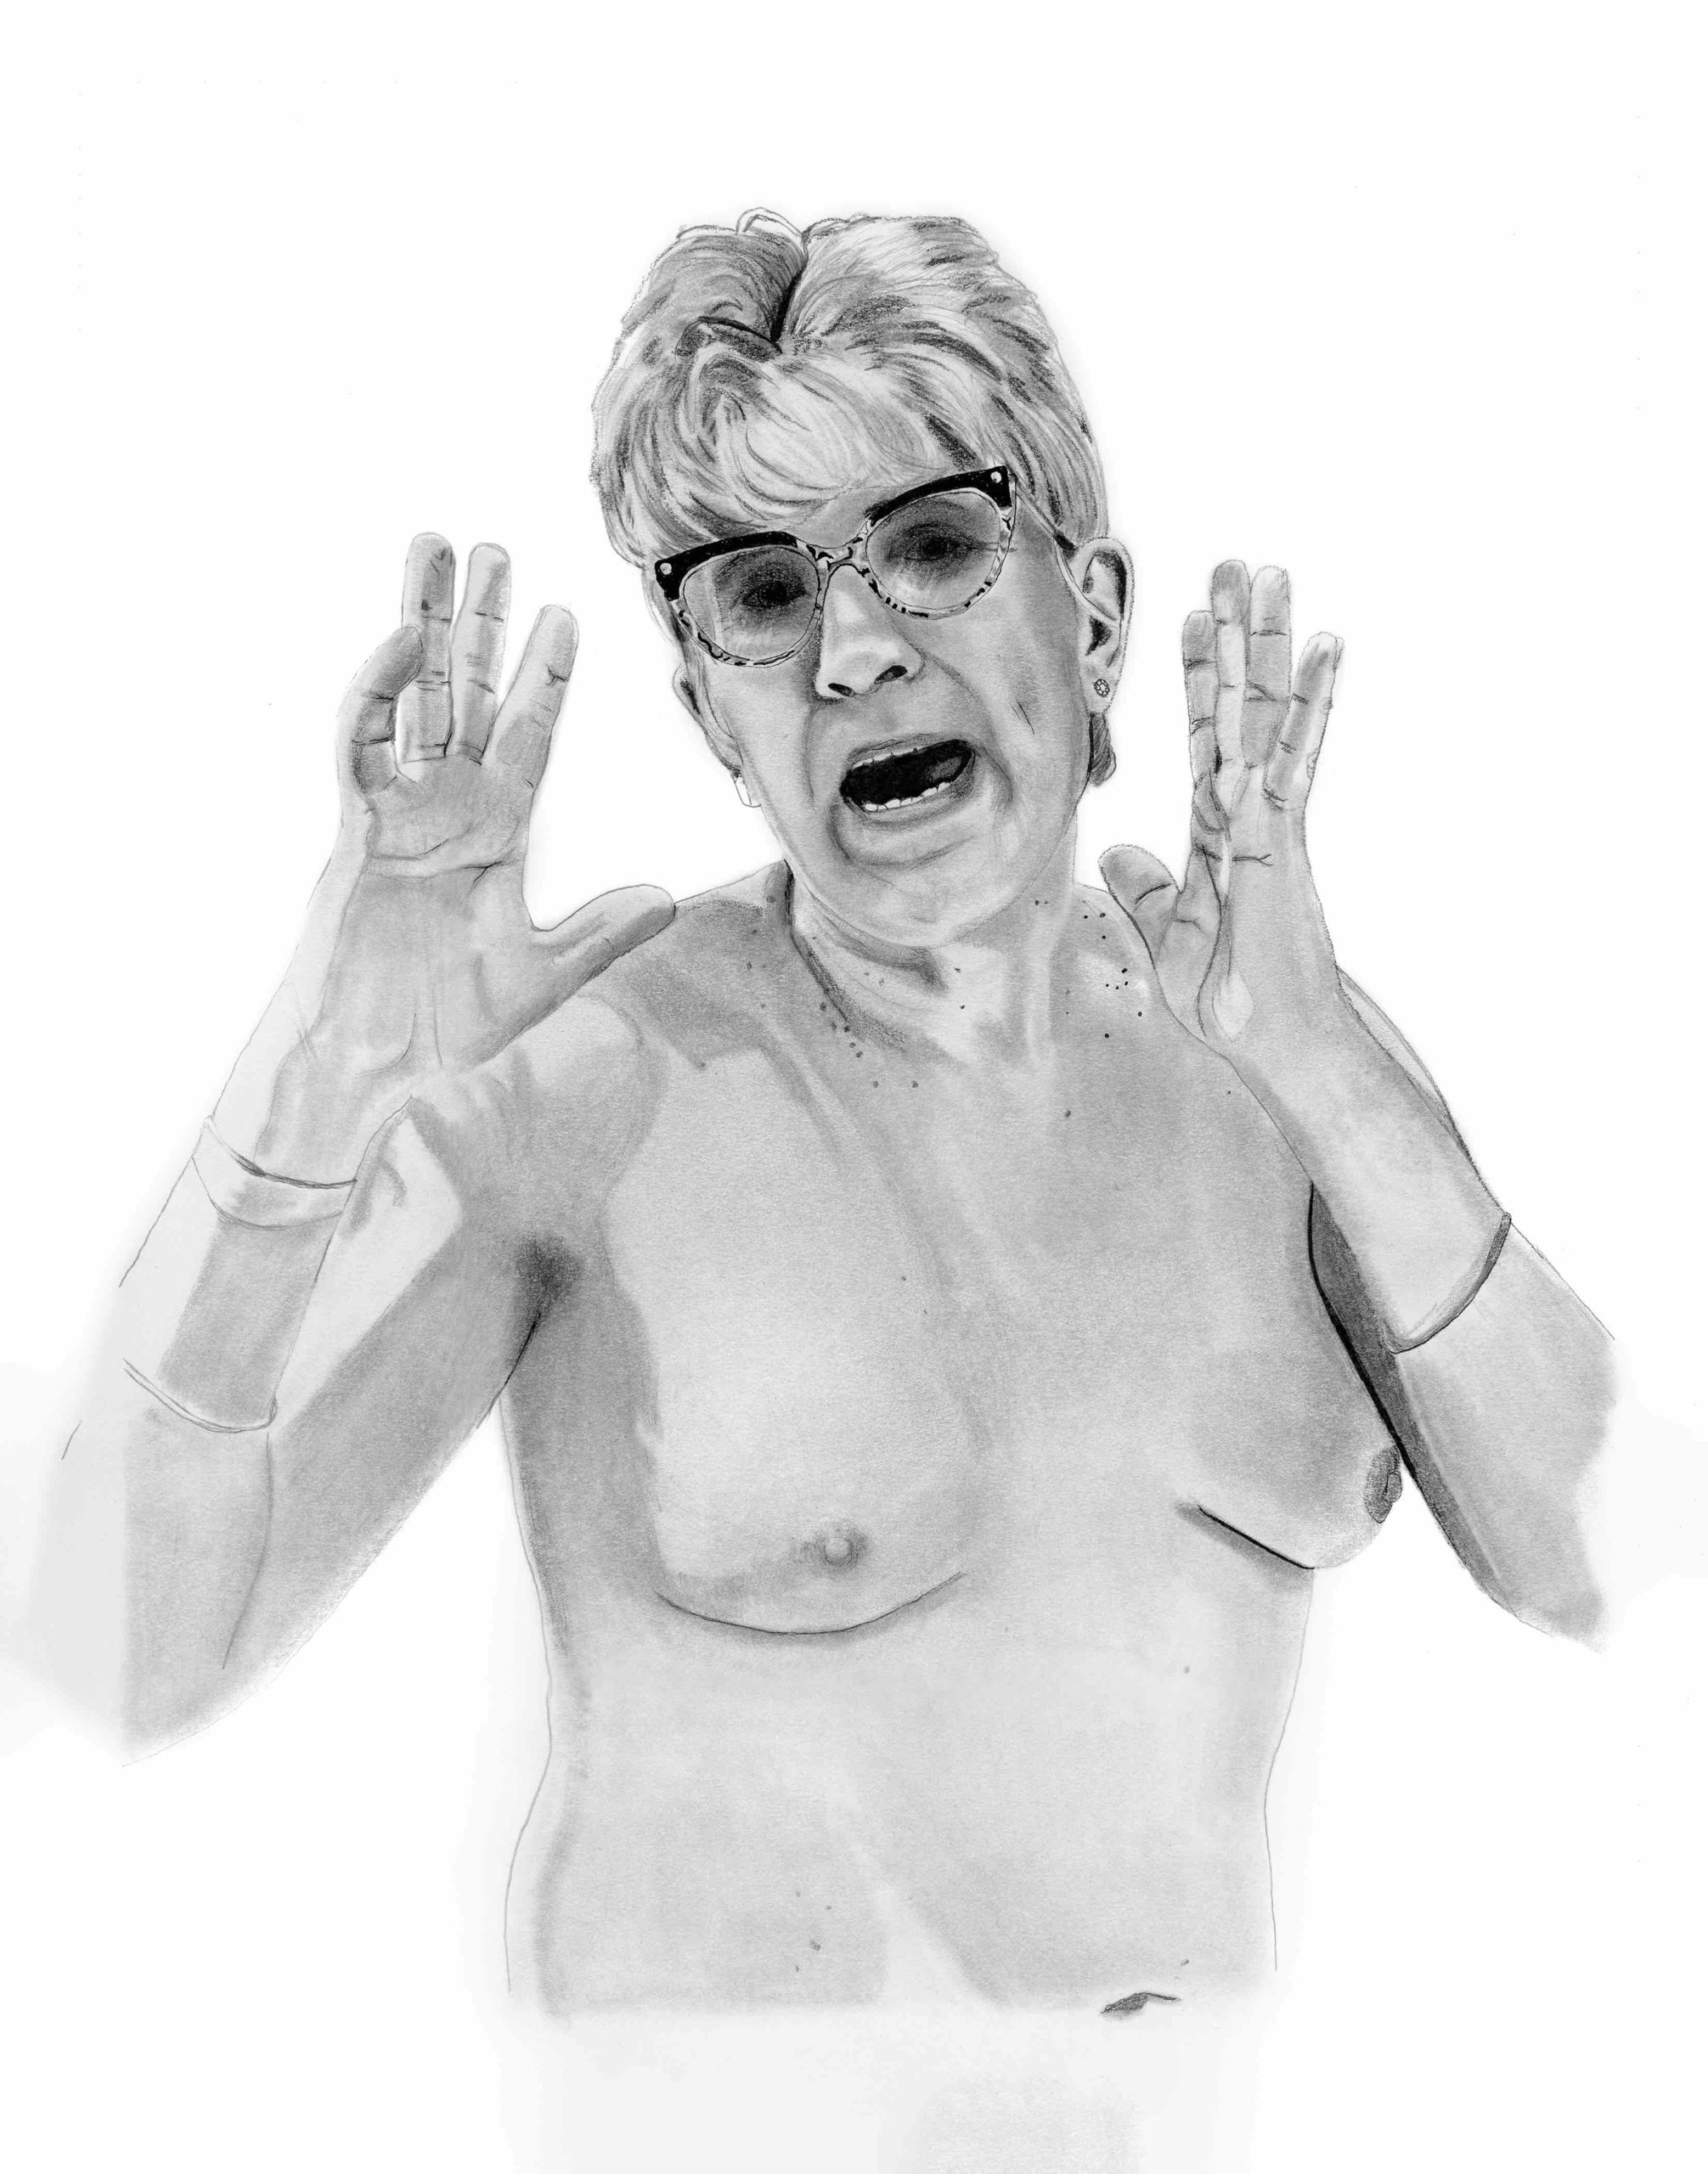 This is a graphite and ink portrait of a nude woman. She is wearing horn-rimmed glasses. Her mouth is open mid-speech, her hands held up, fingers spread, as if to amplify her words.